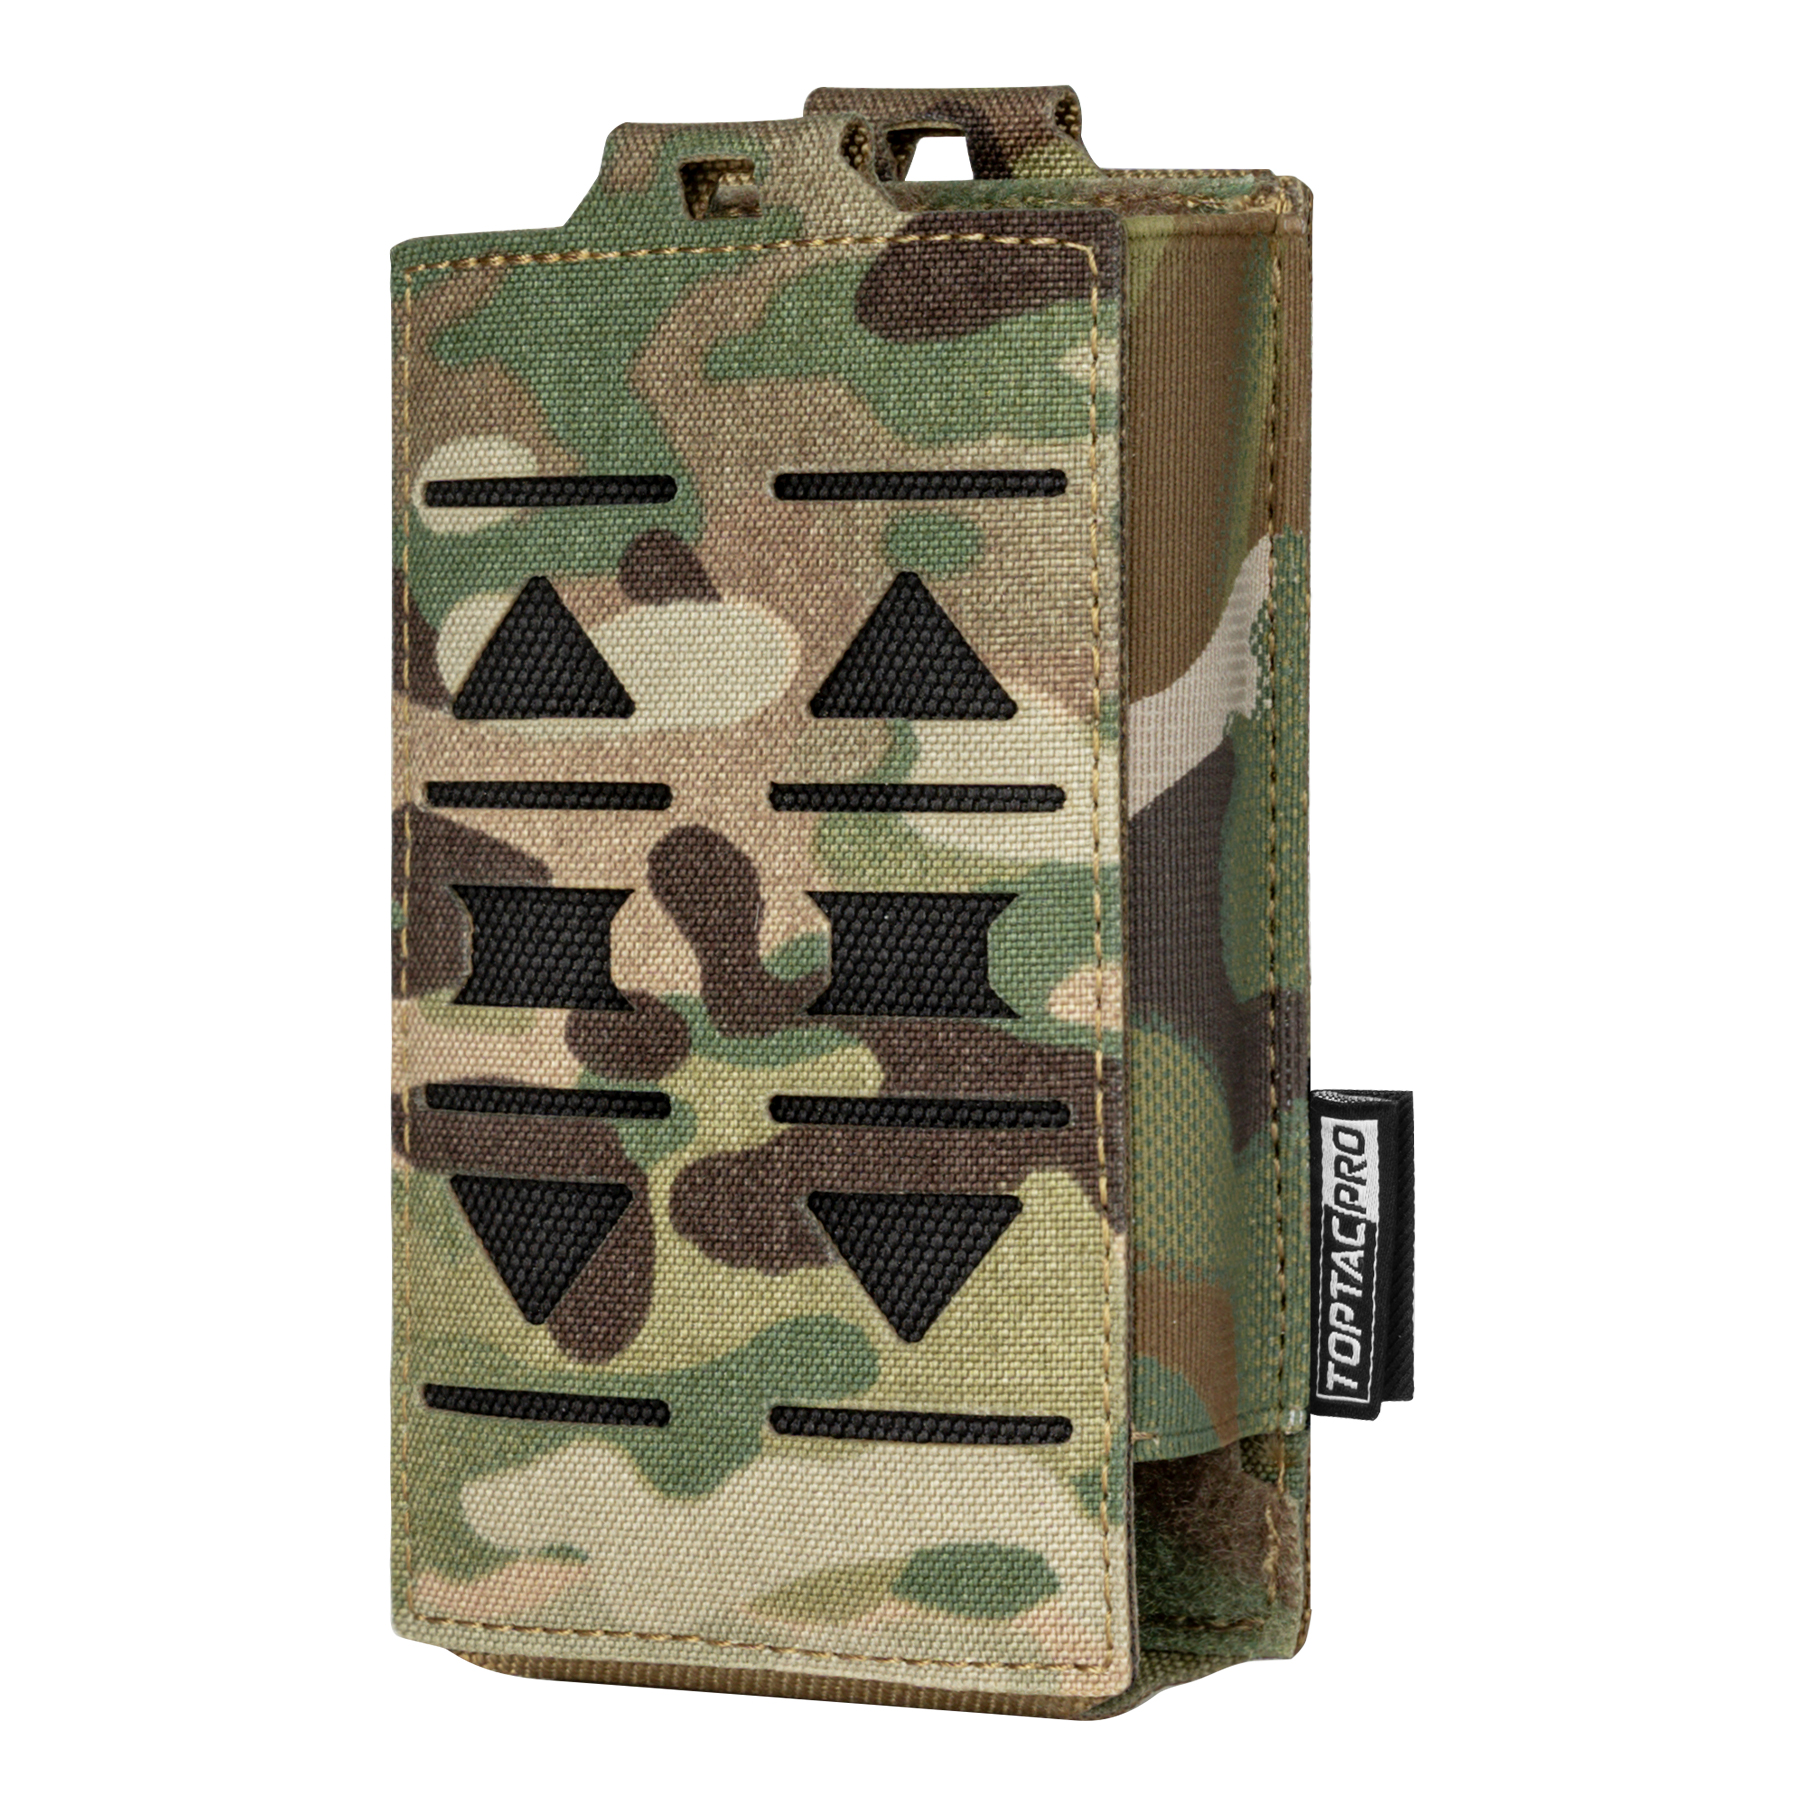 TOPTACPRO Tactical Mag Pouch 5.56mm MOLLE Single Mag Carrier Laser Cut Design Airsoft 8514-IDOGEAR INDUSTRIAL